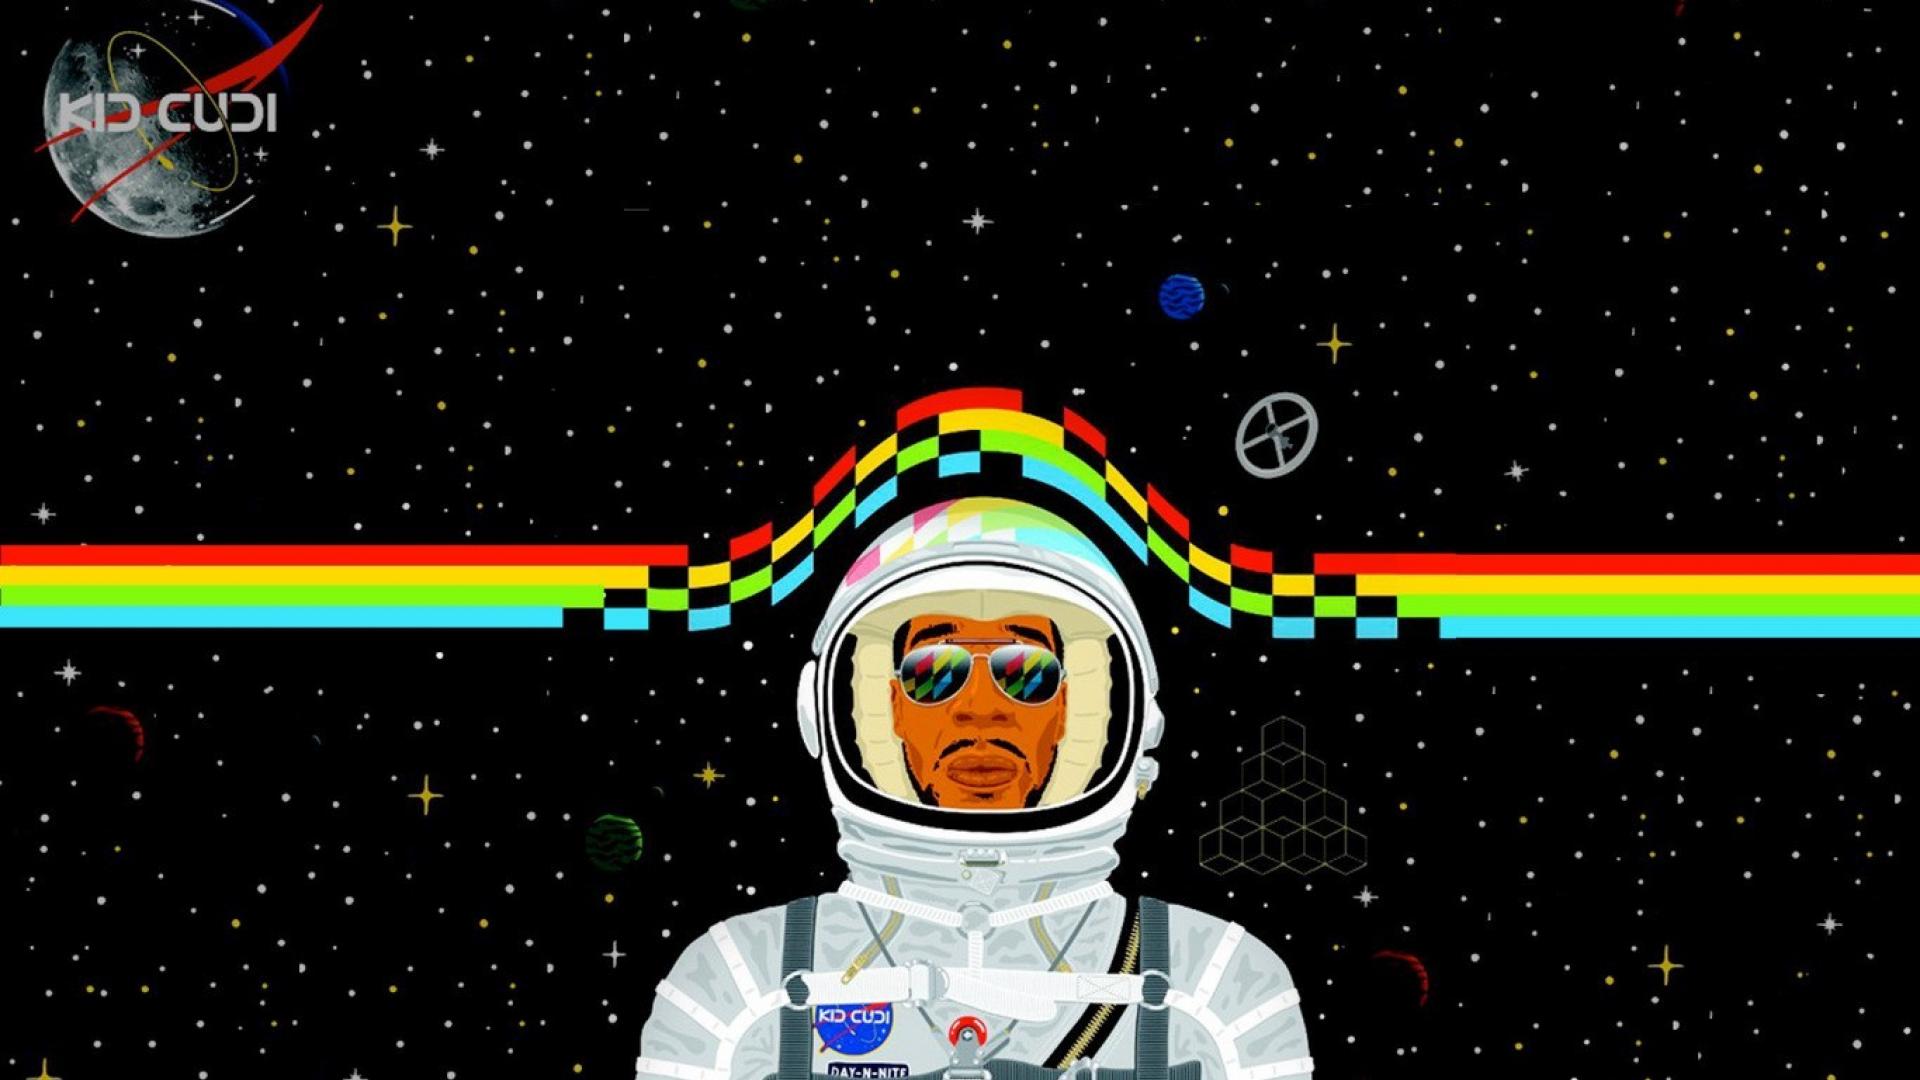 kid cudi iphone wallpaper,astronaut,space,fictional character,graphic design